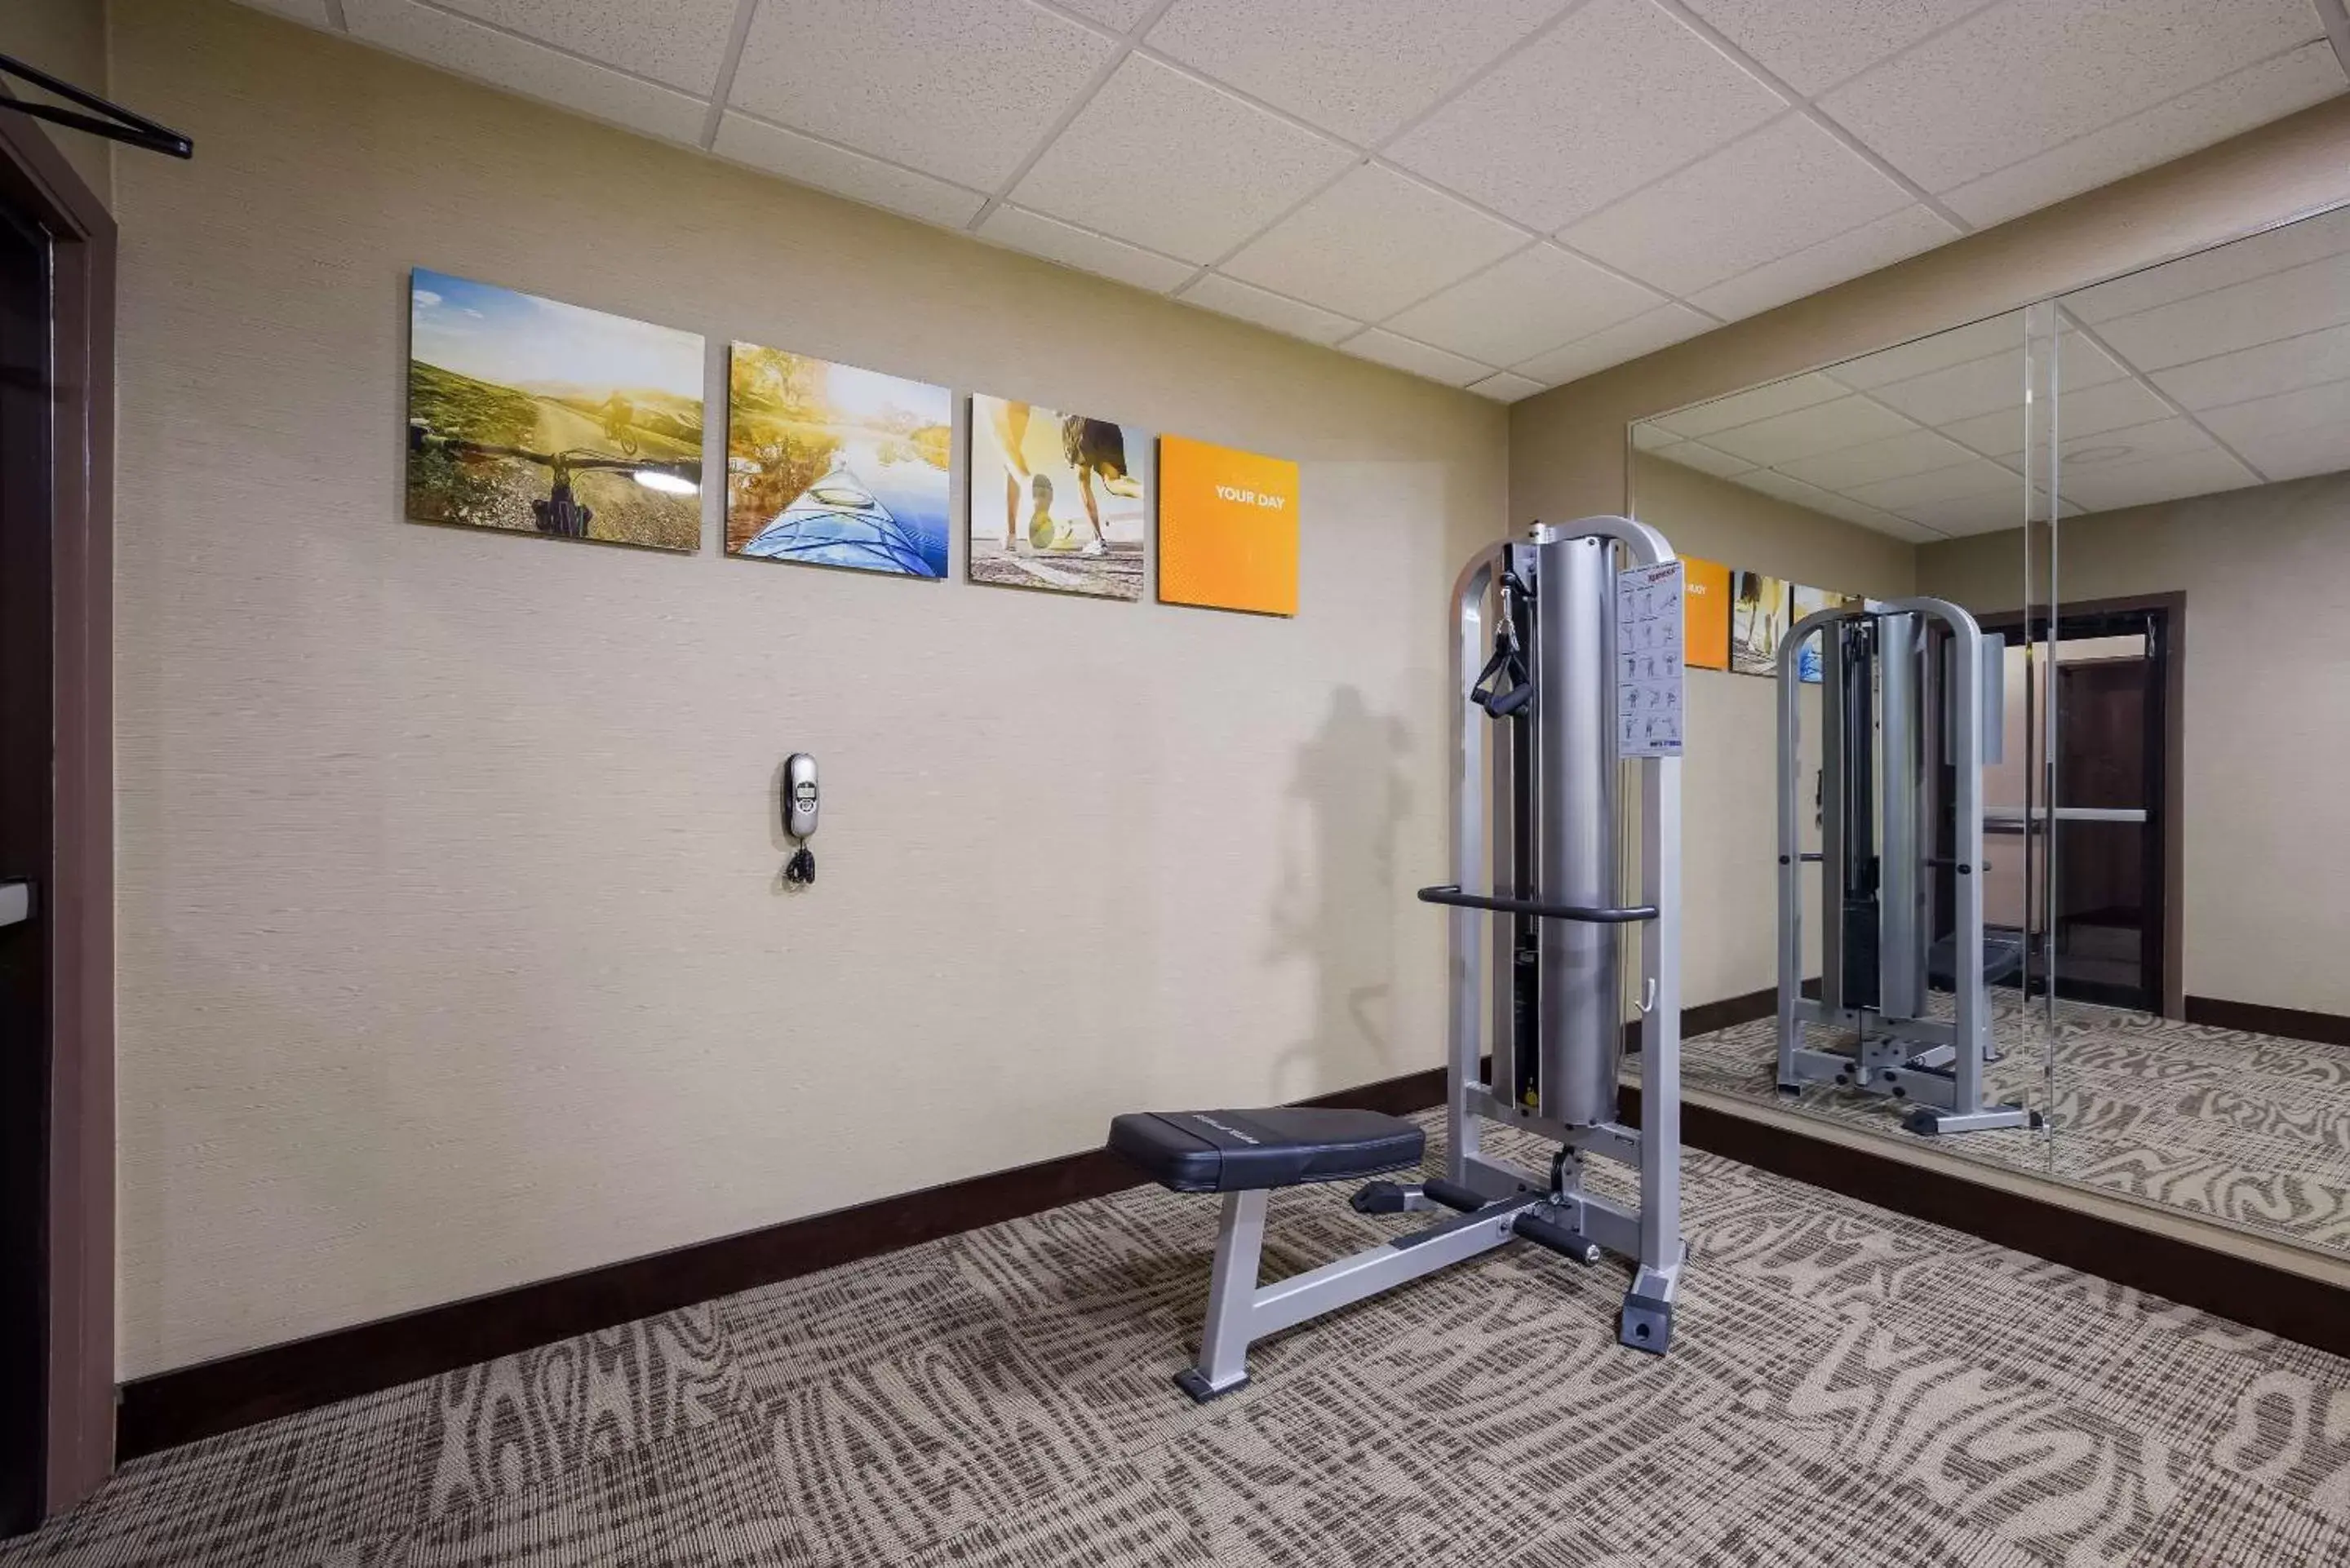 Fitness centre/facilities, Fitness Center/Facilities in Comfort Inn & Suites Midway - Tallahassee West